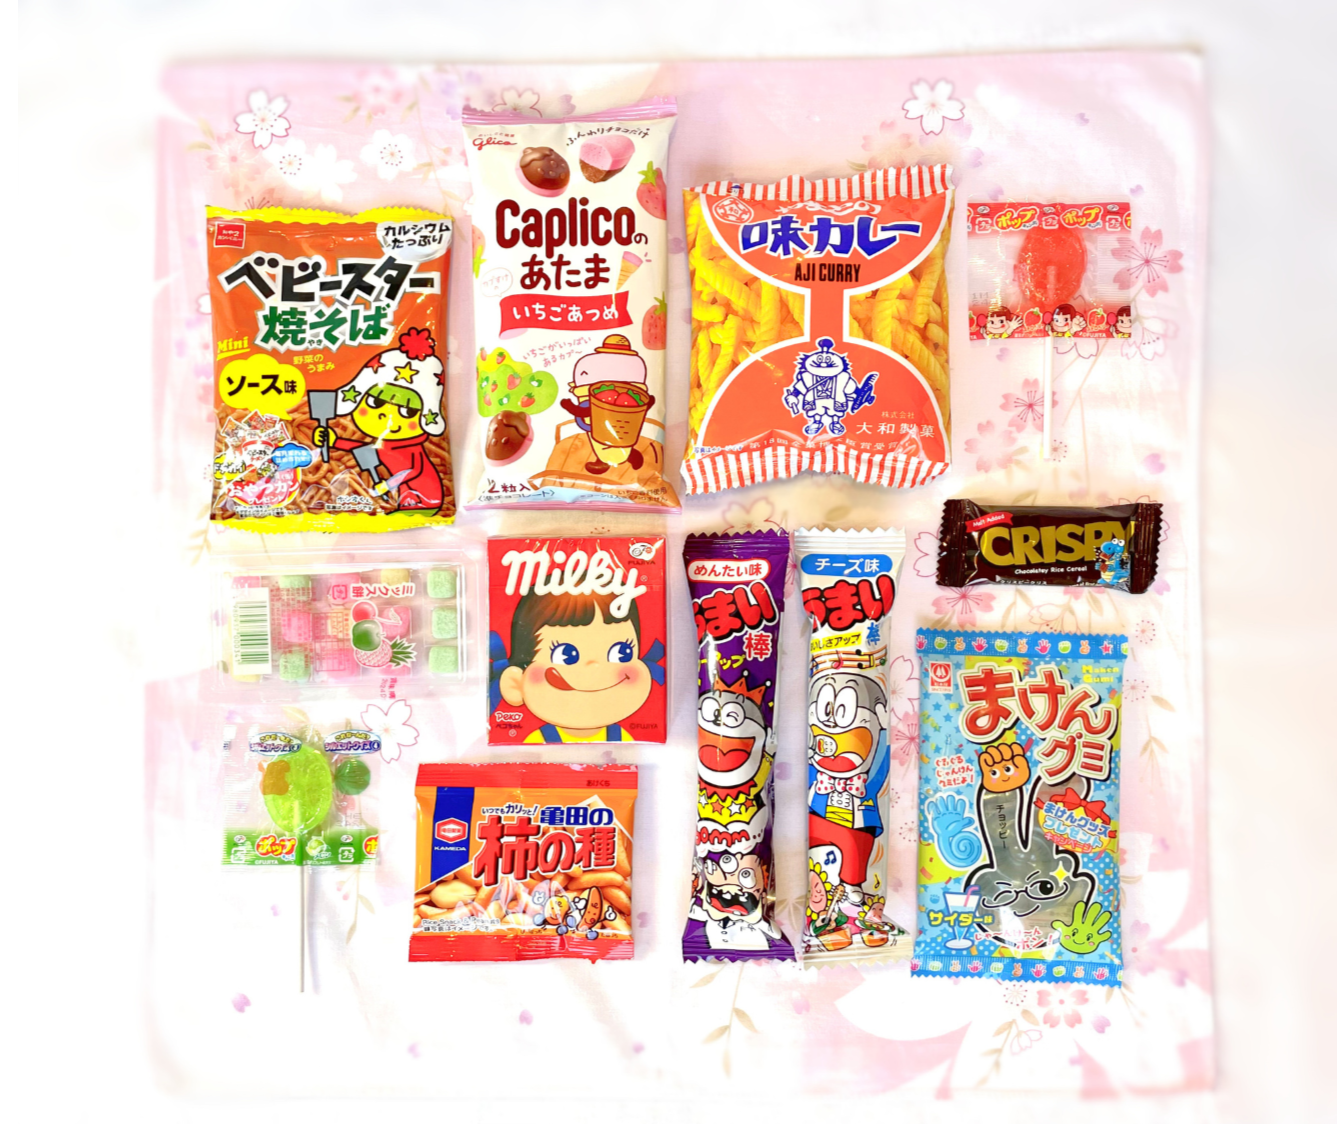 Japanese sweets and snacks to share